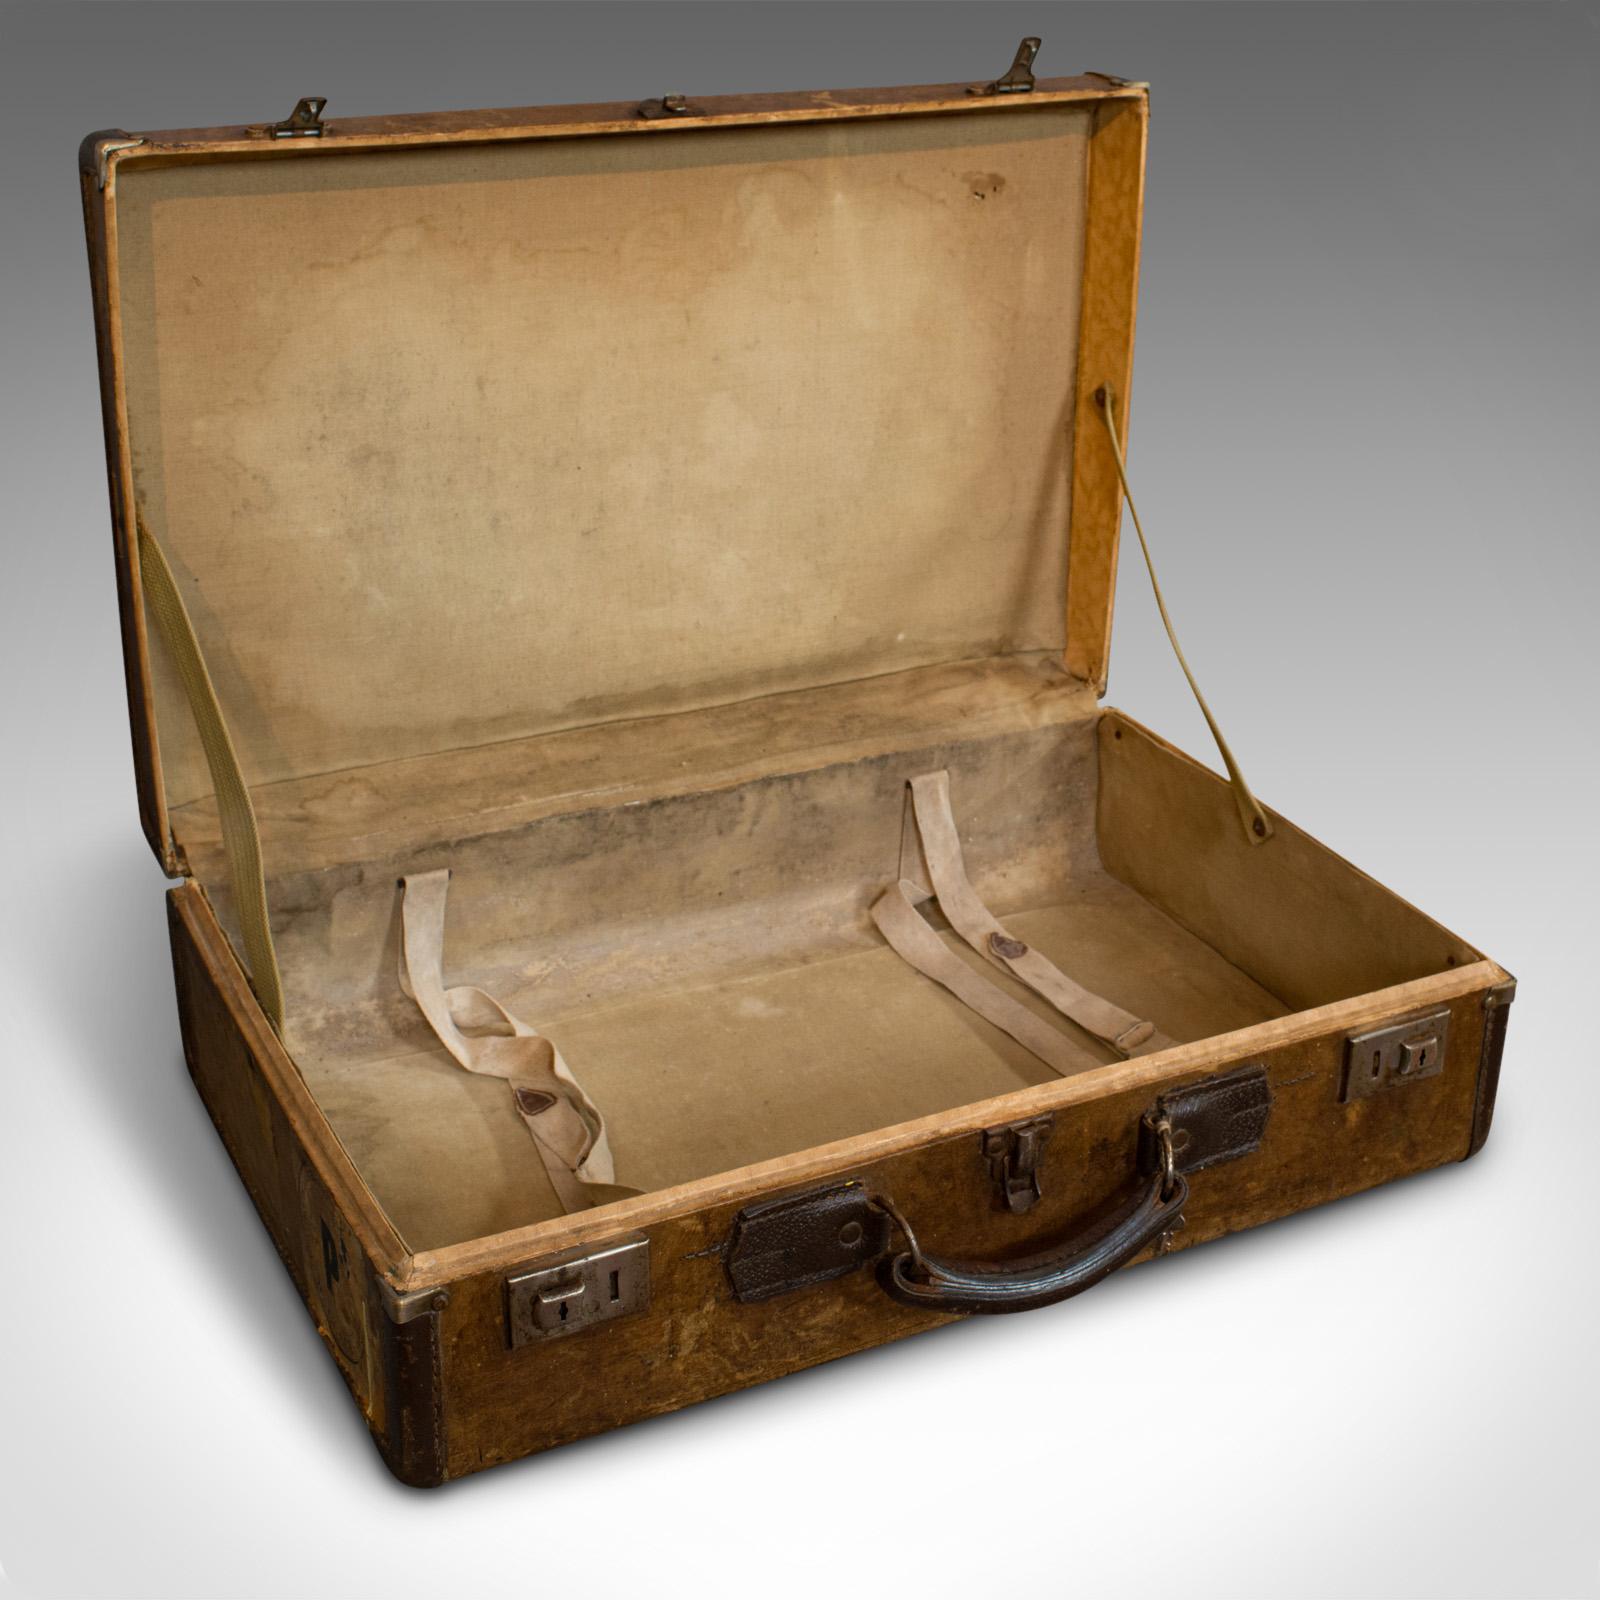 This is a vintage suitcase. An English, leather bound travel case with period decoration, dating to the early 20th century, circa 1930.

Appealing suitcase from the golden age of travel
Displays a desirable aged patina
Leather border adds tonal